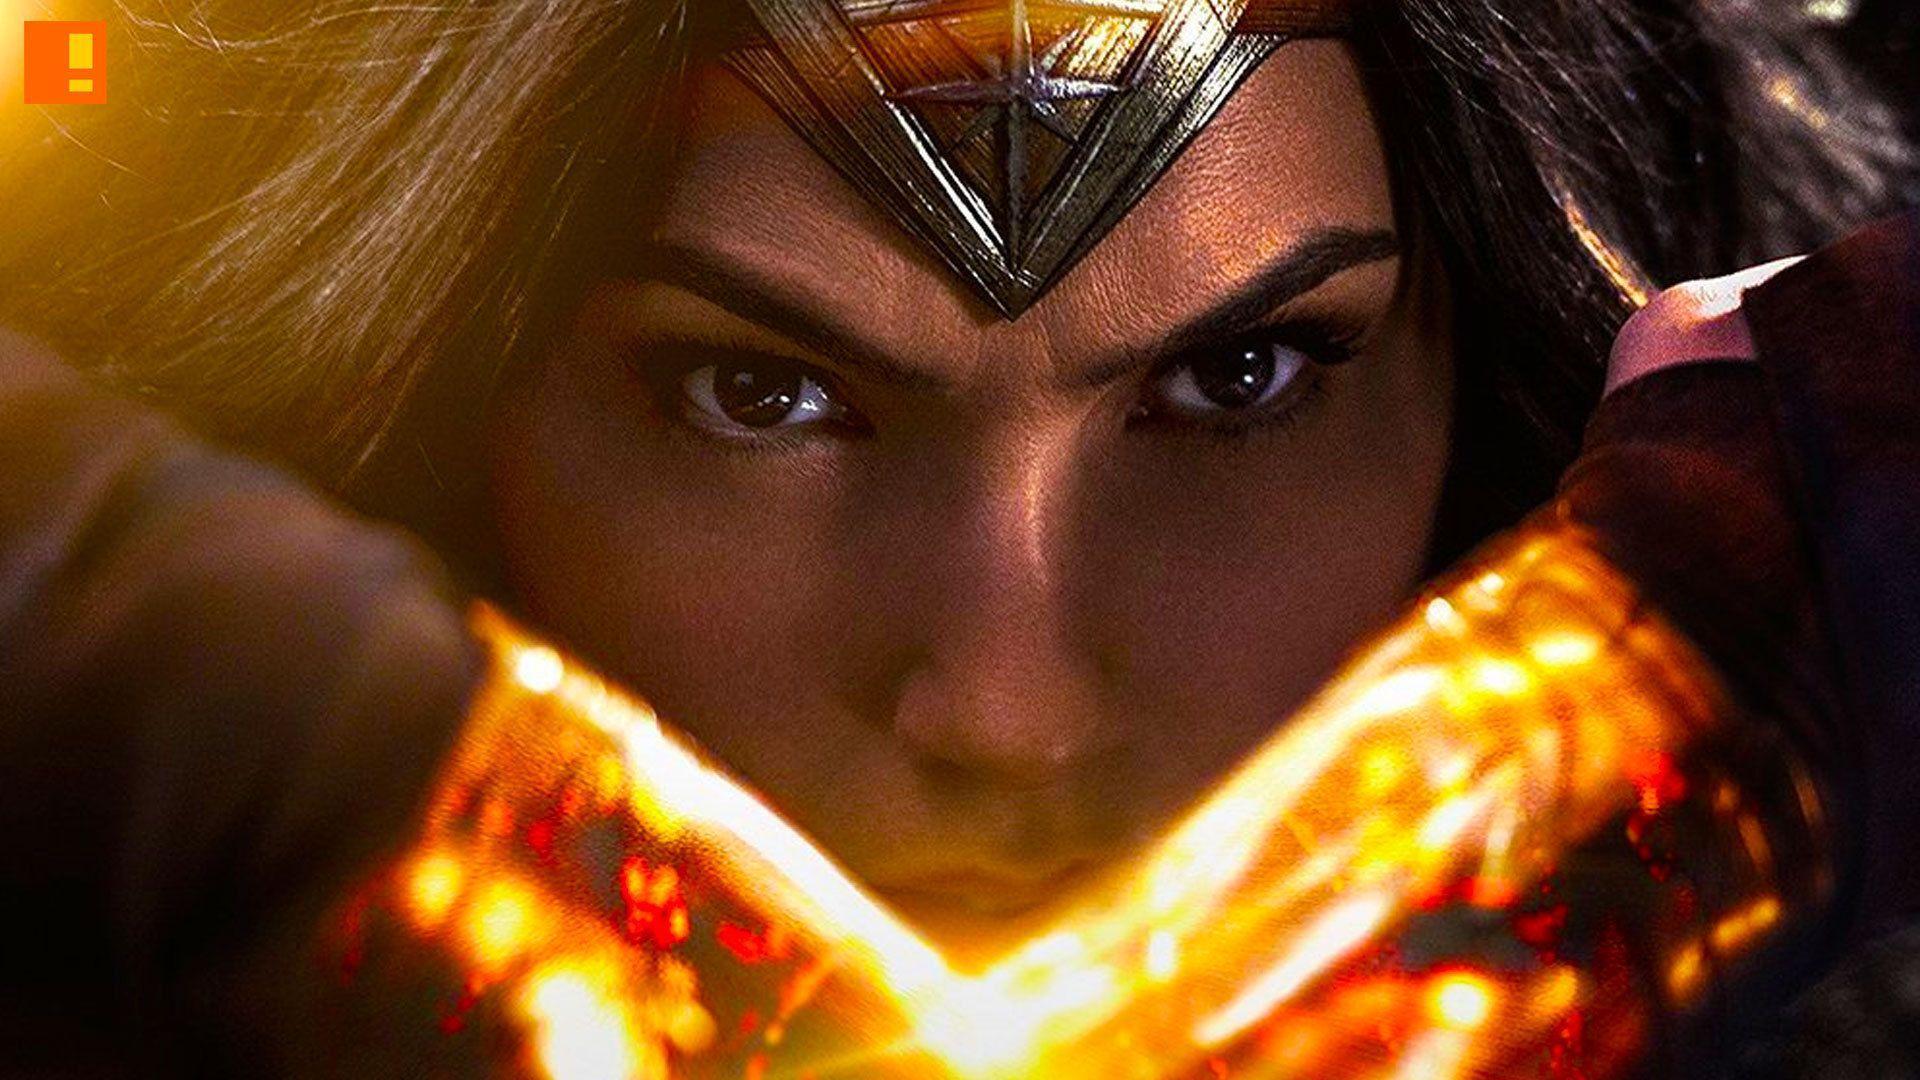 Wonder Woman Movie Wallpaper Image Photo Picture Background